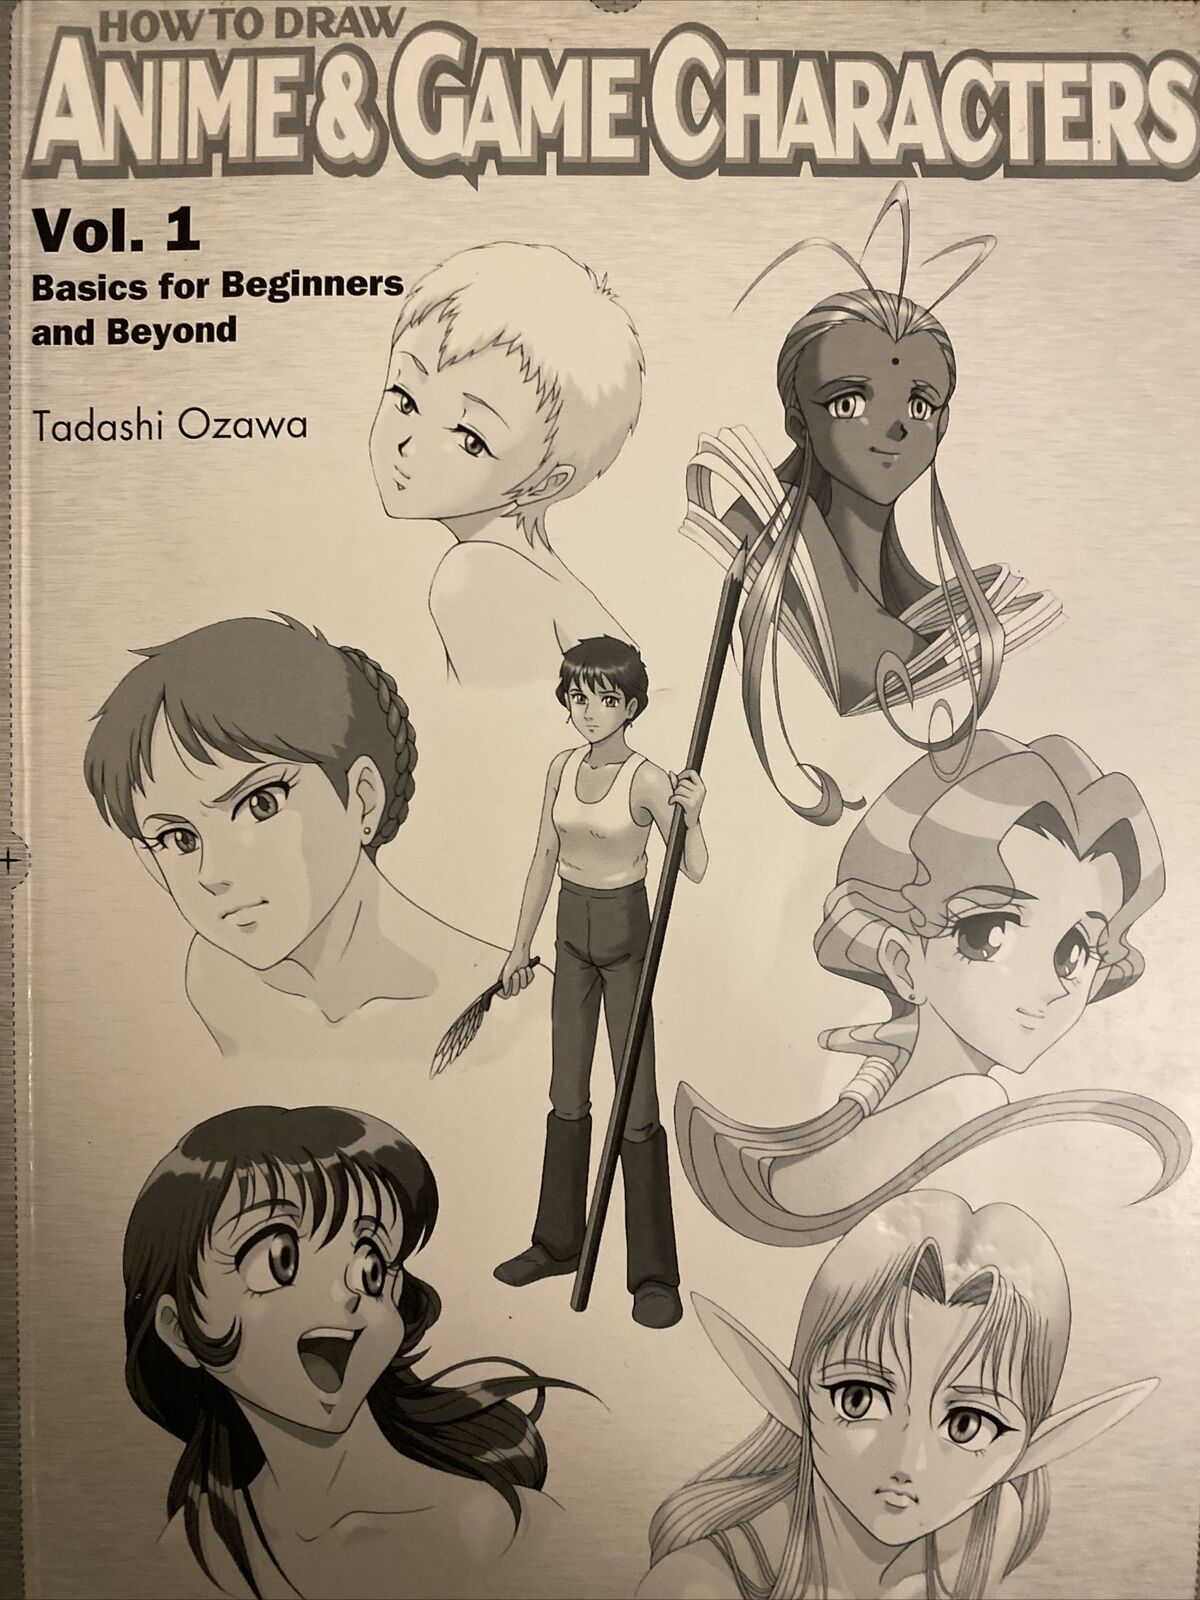 HOW TO DRAW ANIME & GAME CHARACTERS VOL 1 Basics for Beginners & Beyond oop